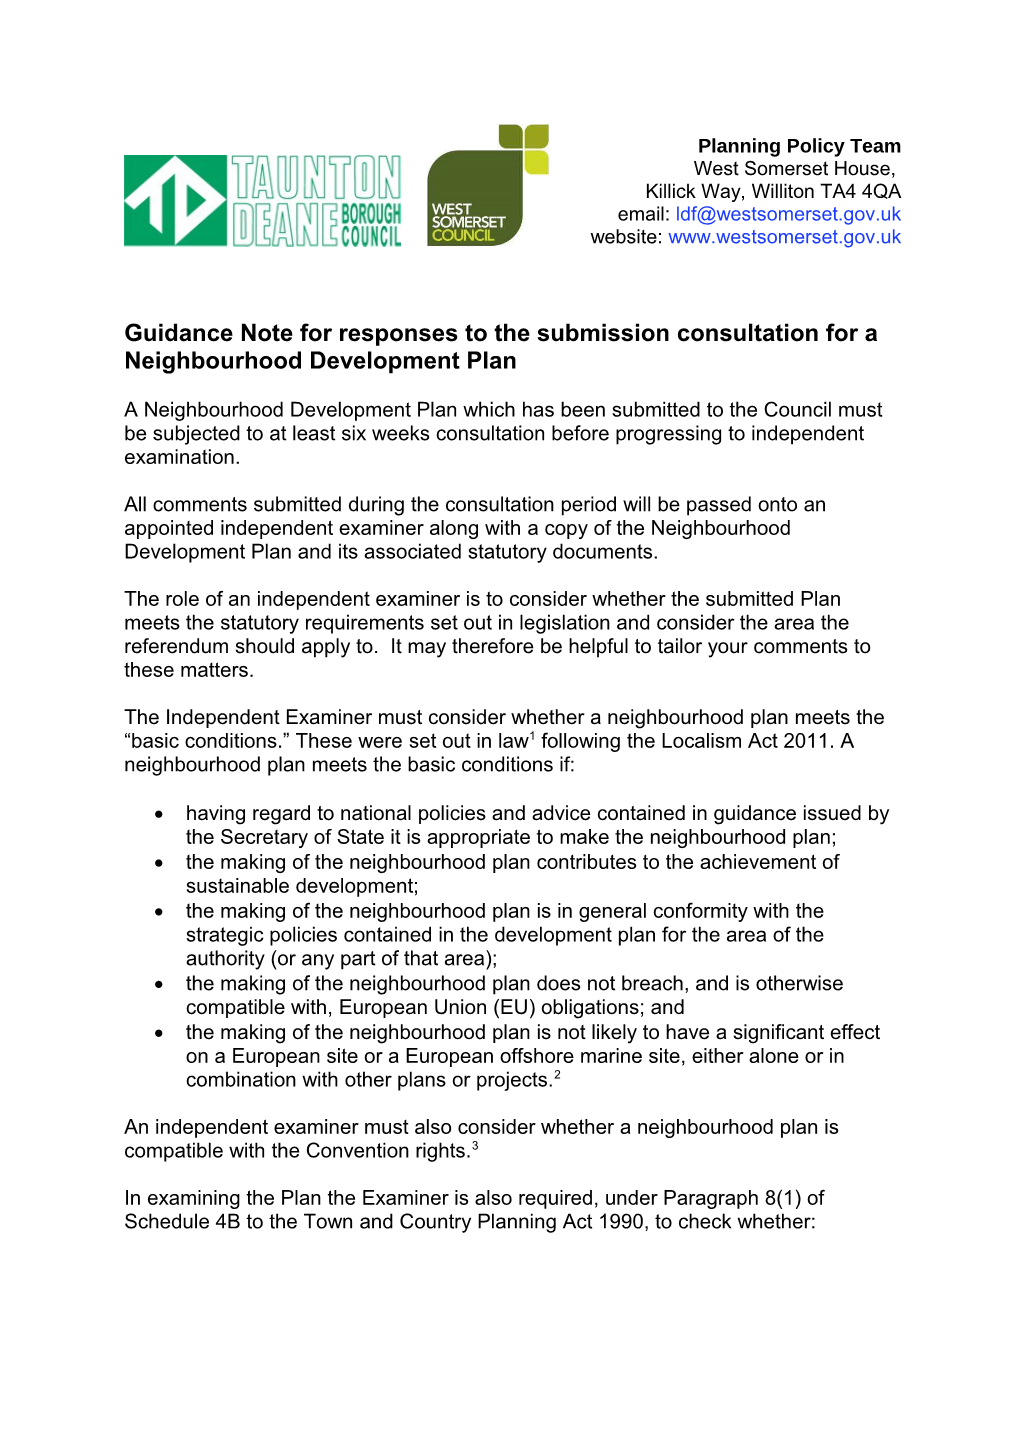 Guidance Note for Responses to the Submission Consultation for a Neighbourhood Development